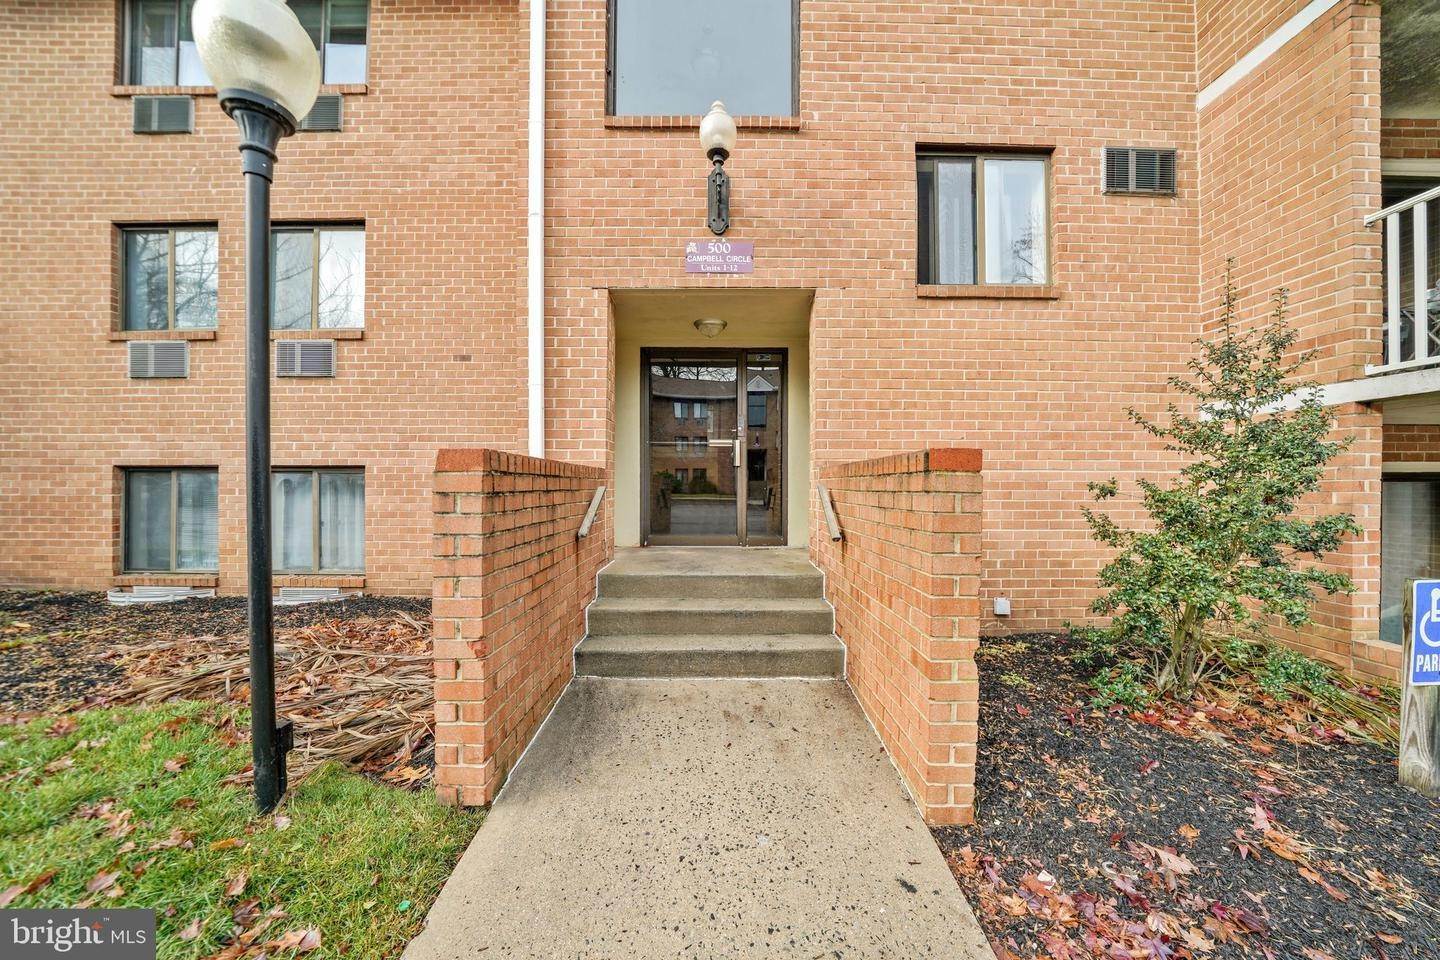 Condominiums for Sale at 500 CAMPBELL CIR #H4 Downingtown, Pennsylvania 19335 United States